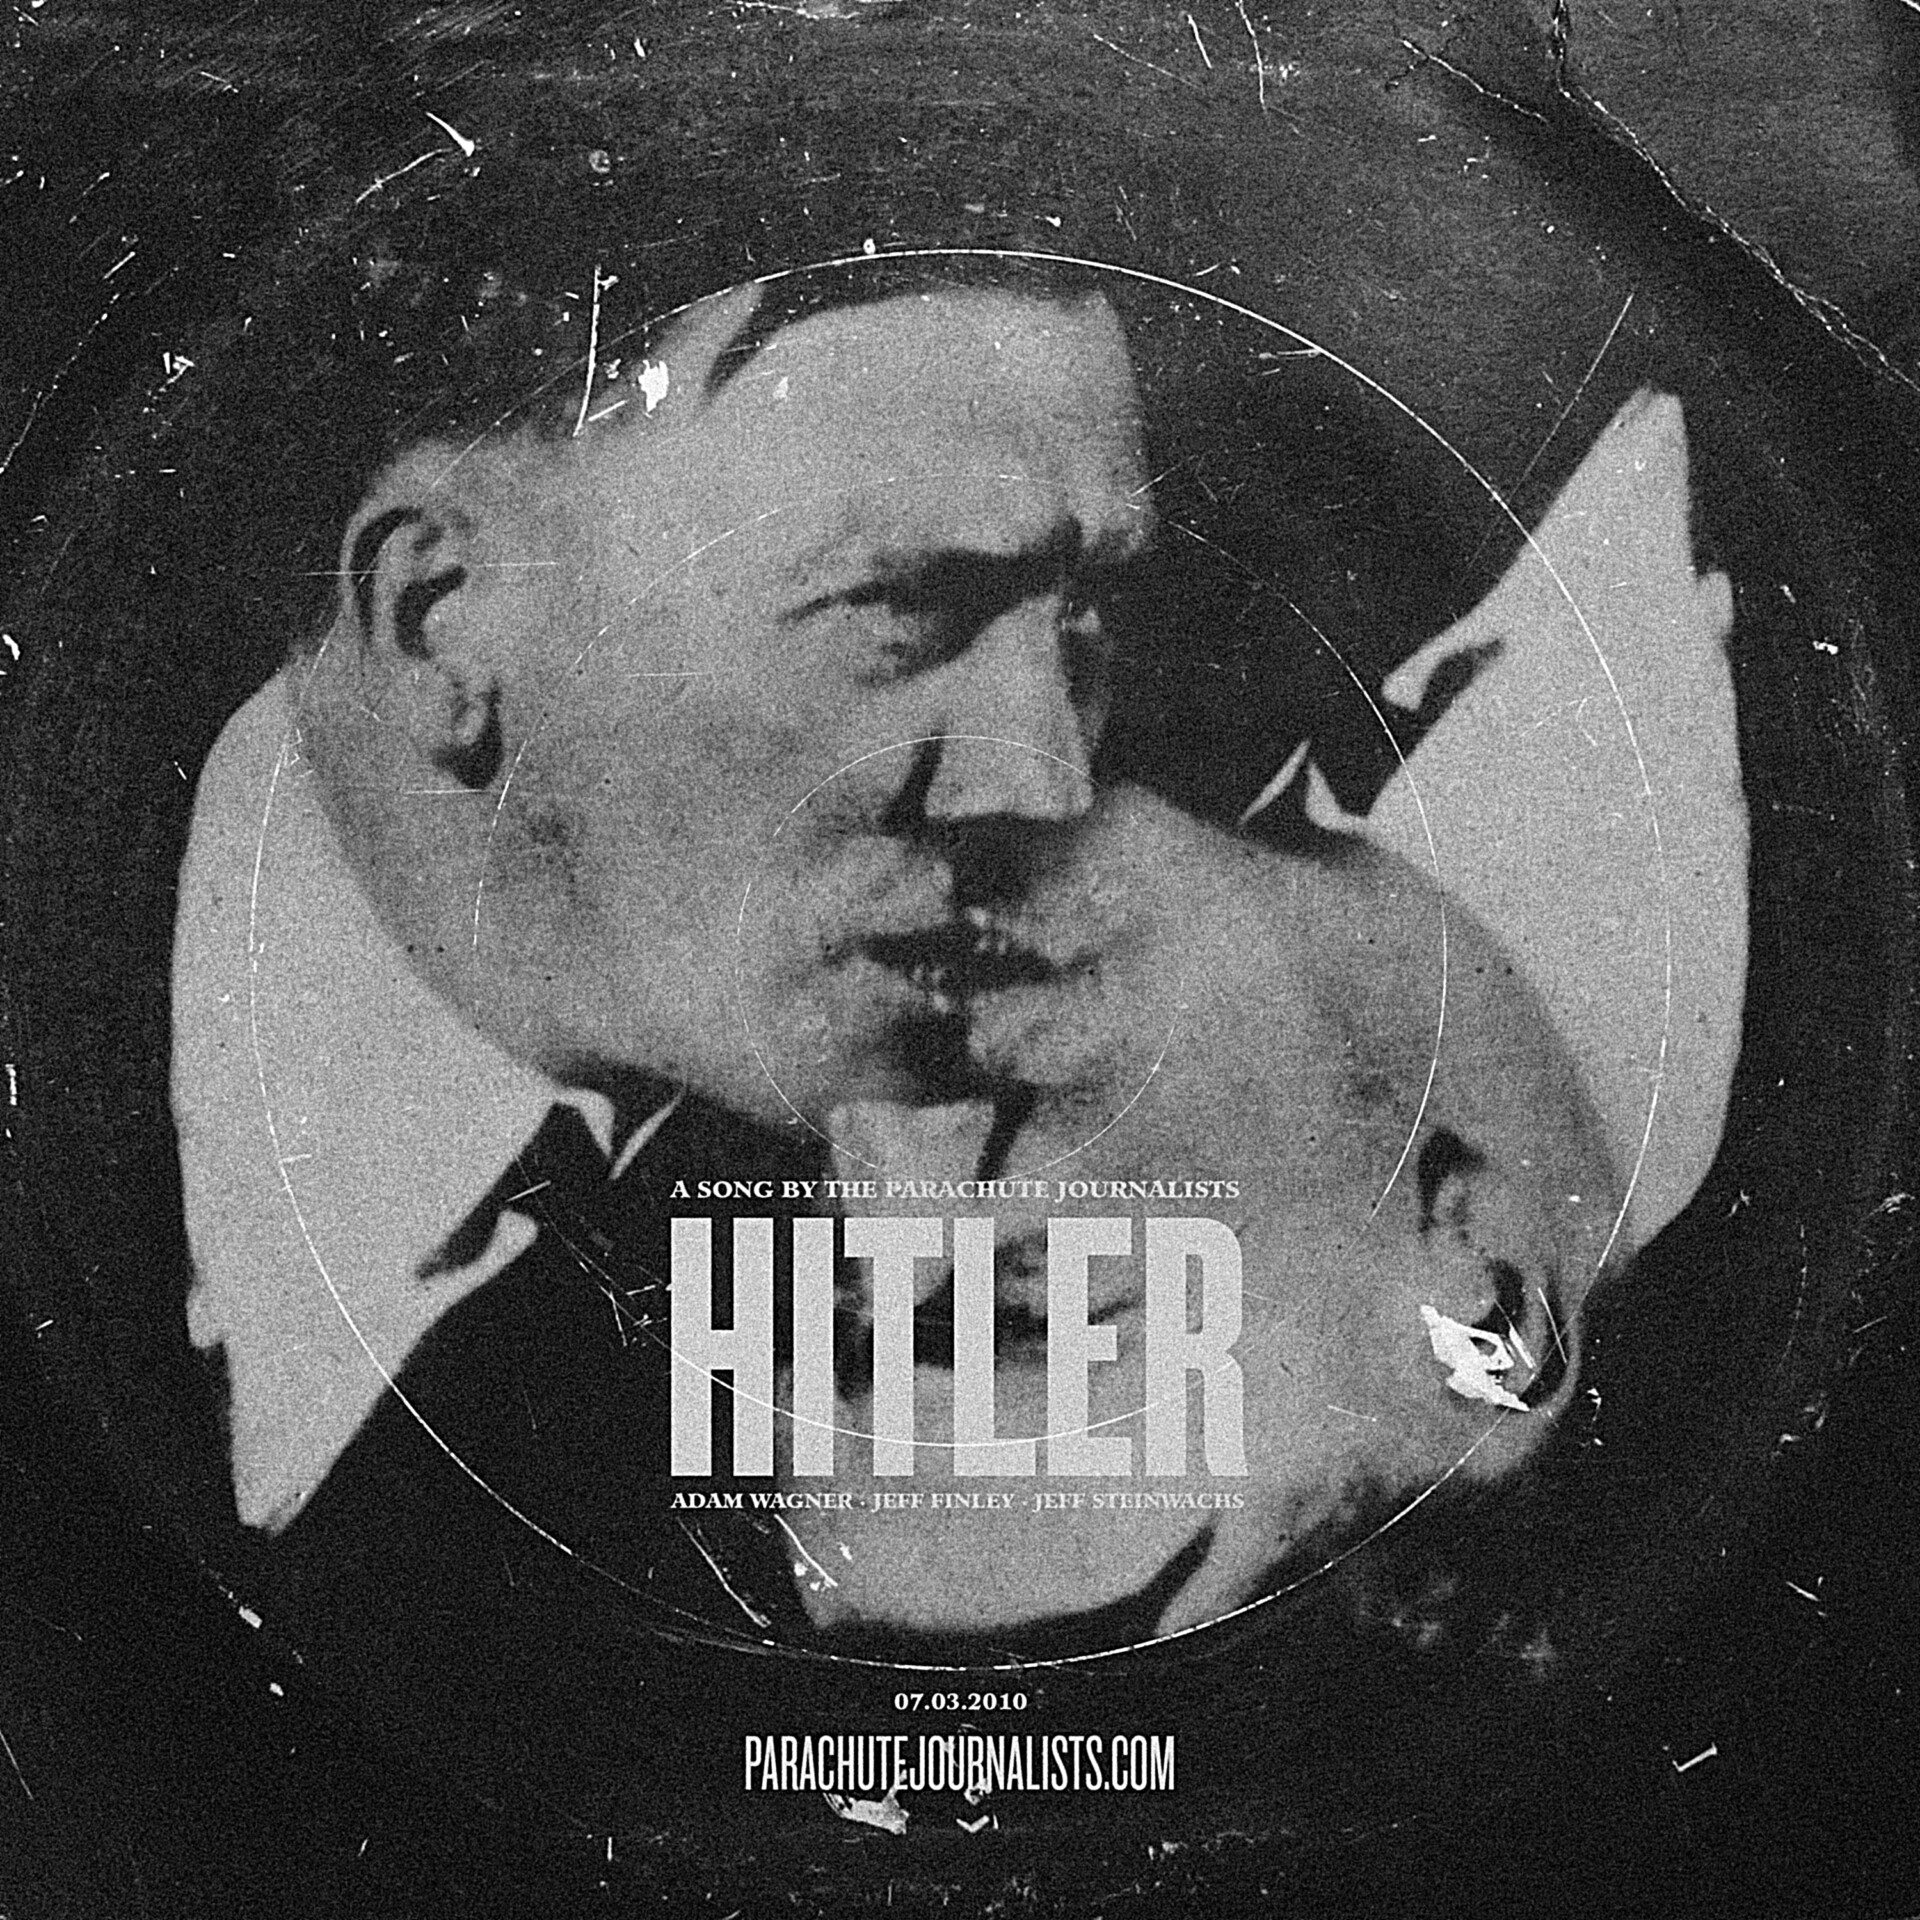 Hitler by Parachute Journalists